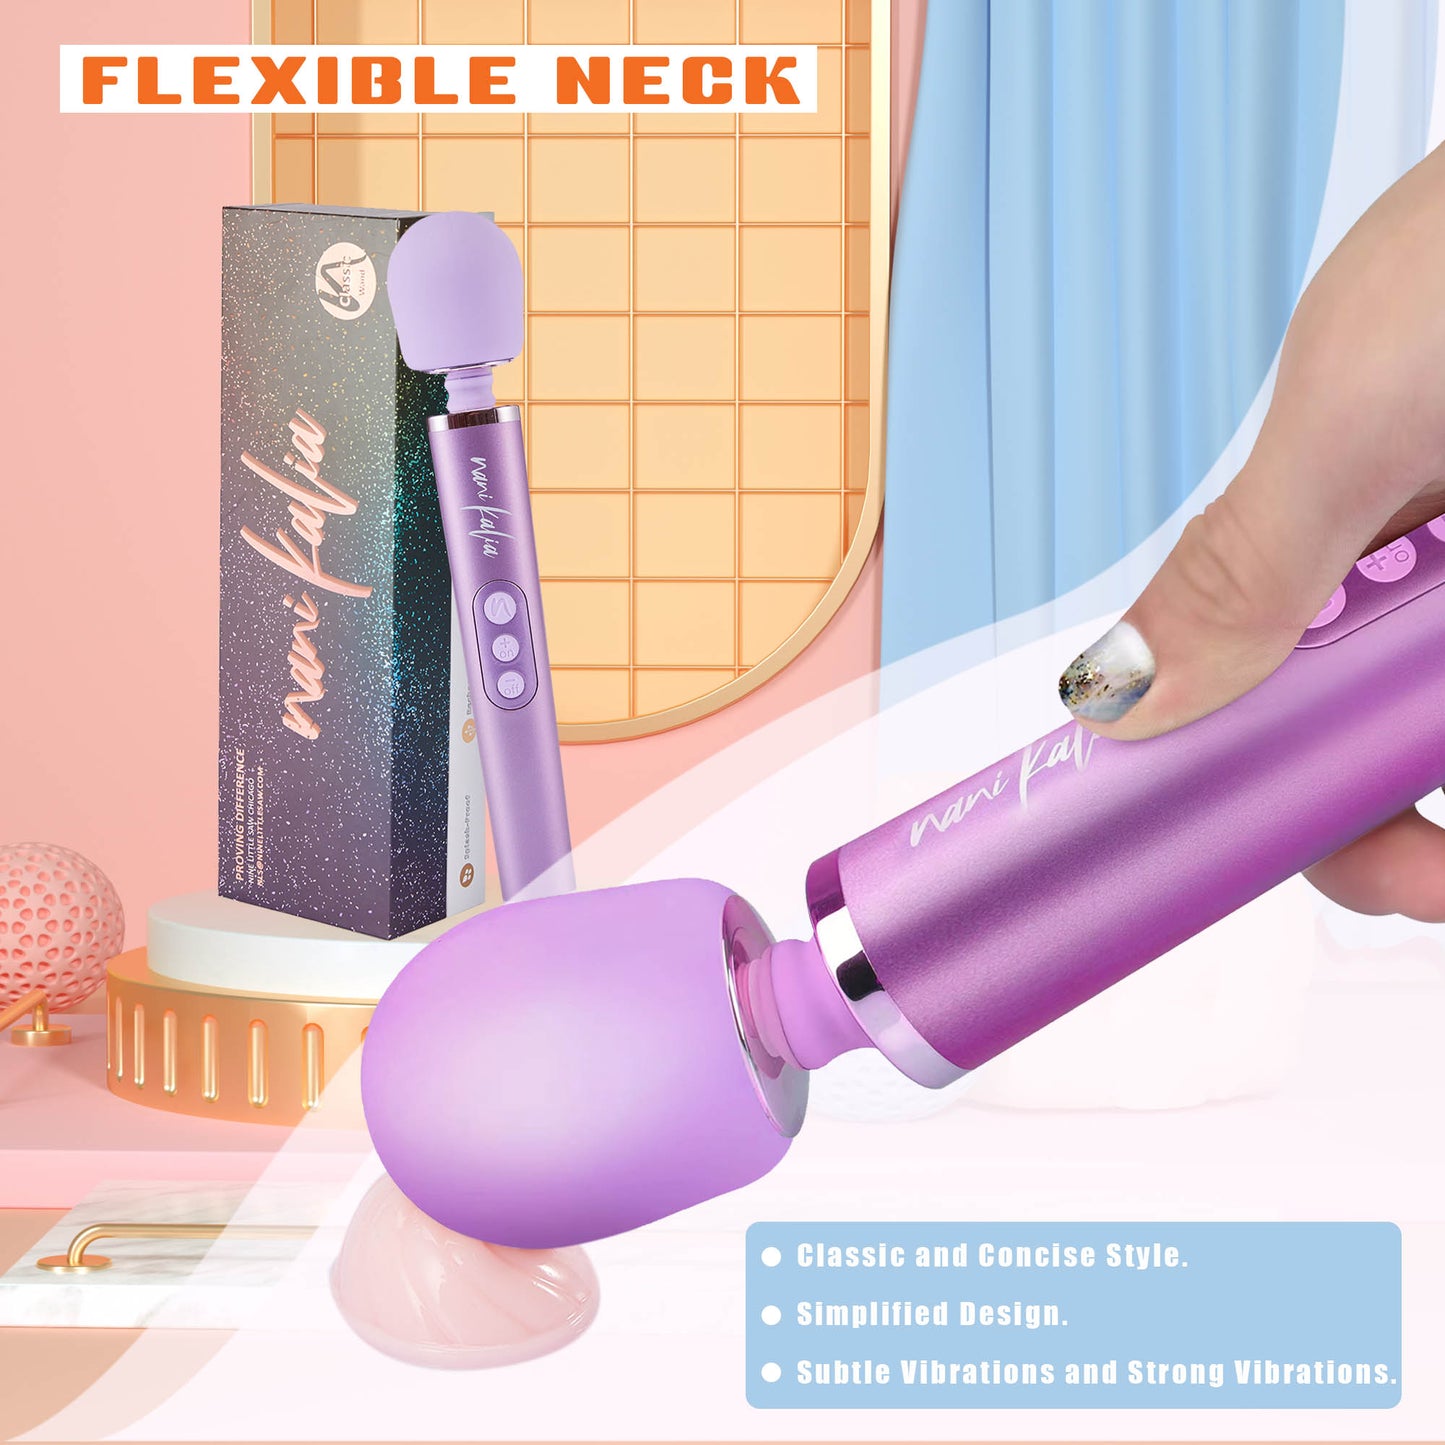 Nani Kalia Wand, Magnetic Rechargeable Waterproof Design 20 Vibration Mode Massager Fine-tuned Vibration Relaxation Function Soft High Quality Silicone (NK18 Purple)